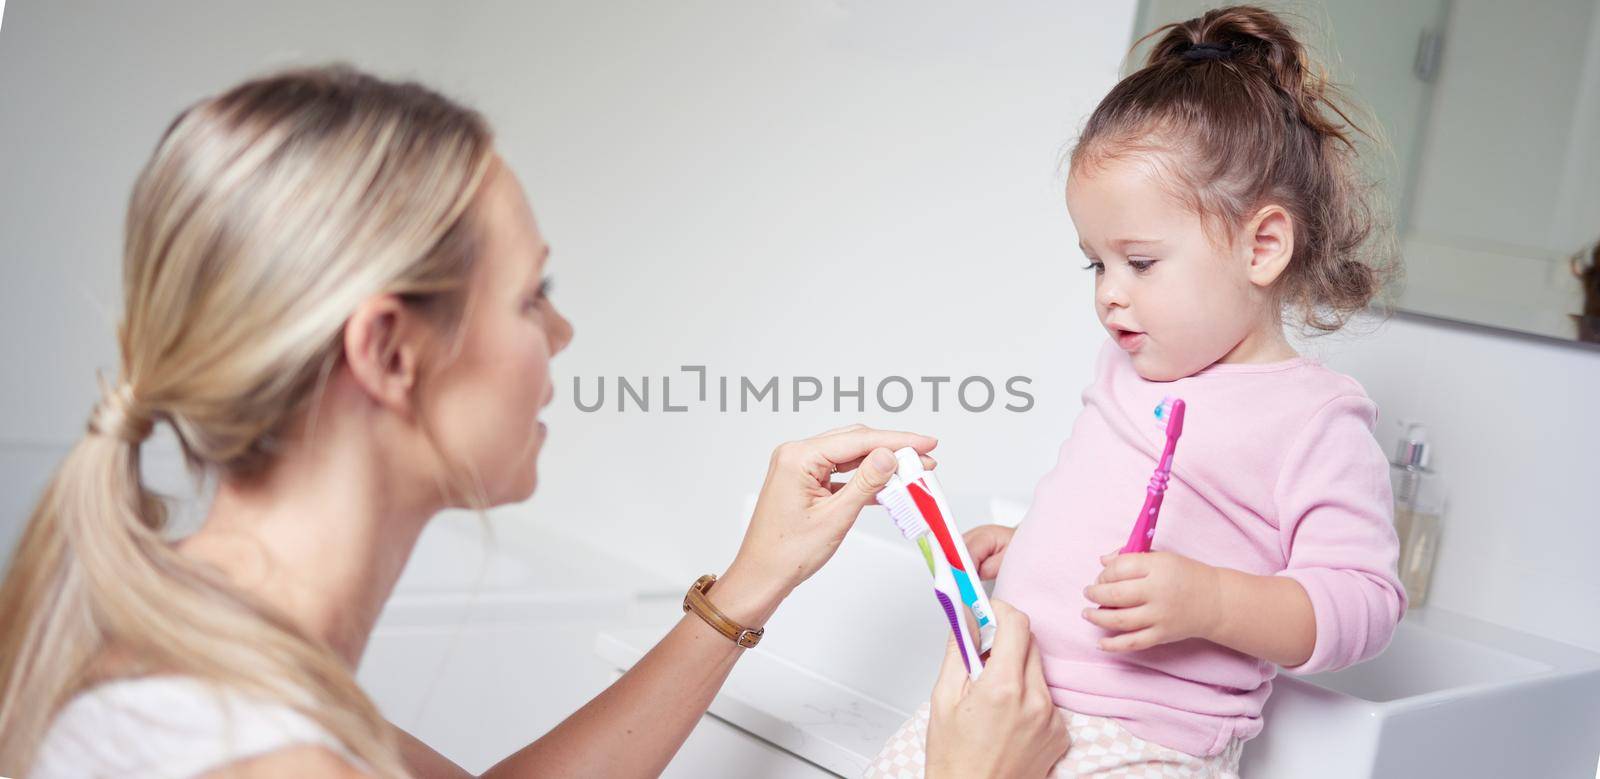 Baby kid brushing teeth with mom in bathroom, morning oral hygiene and clean dental healthcare wellness. Parent with toothpaste and toothbrush teaching young toddler girl child healthy mouth cleaning.